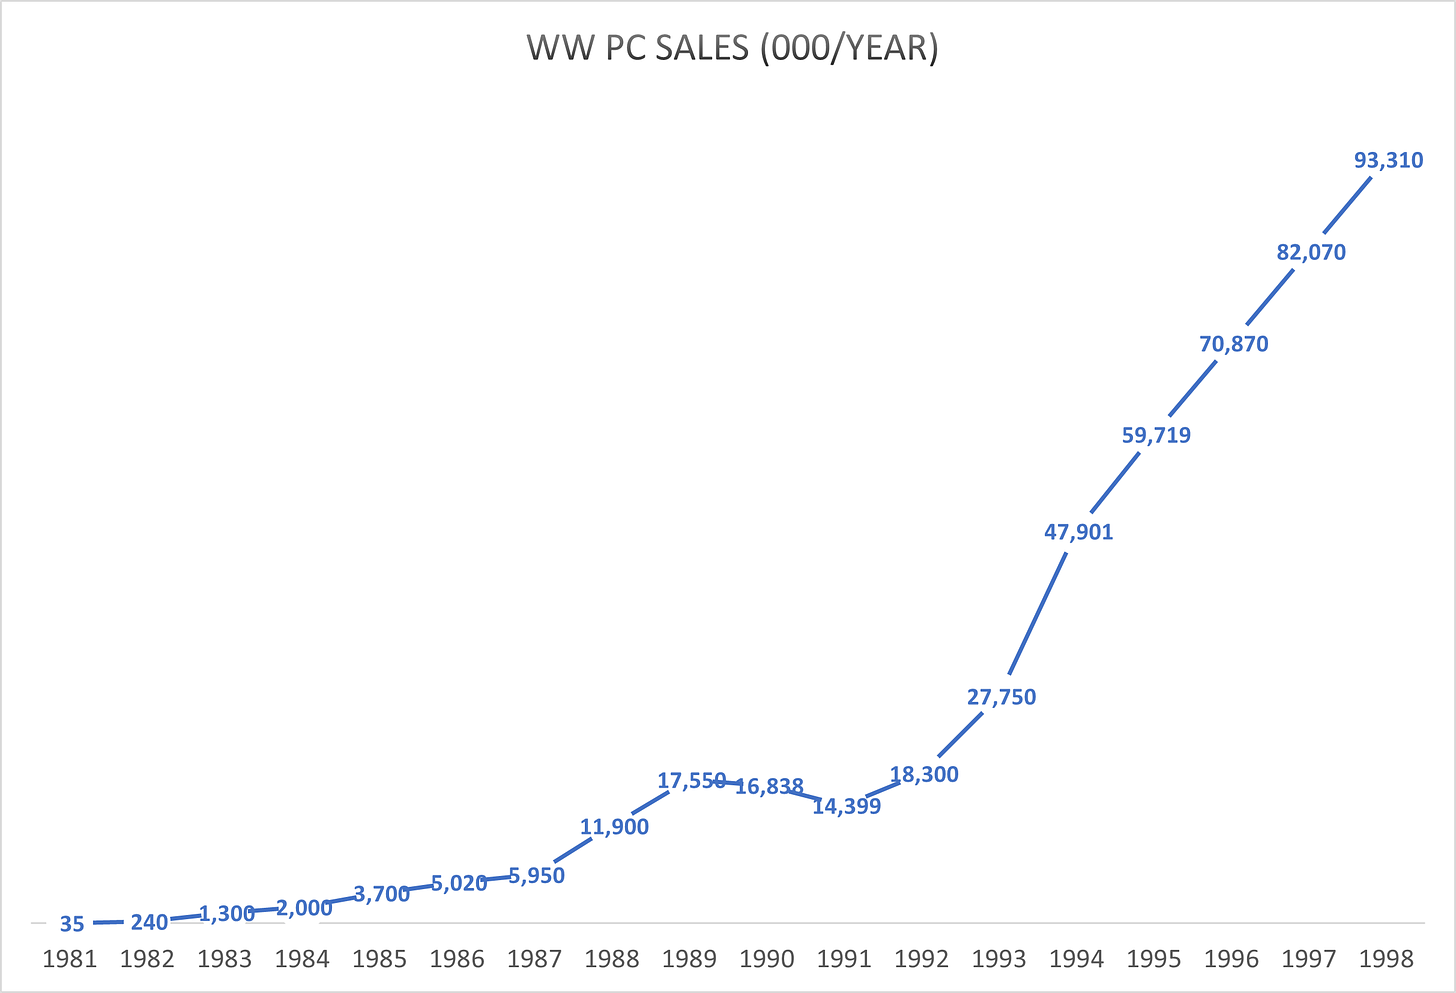 PC Sales graph showing growth of PC Sales from 1981 to 1998. The curve shows very steep growth since Windows 95